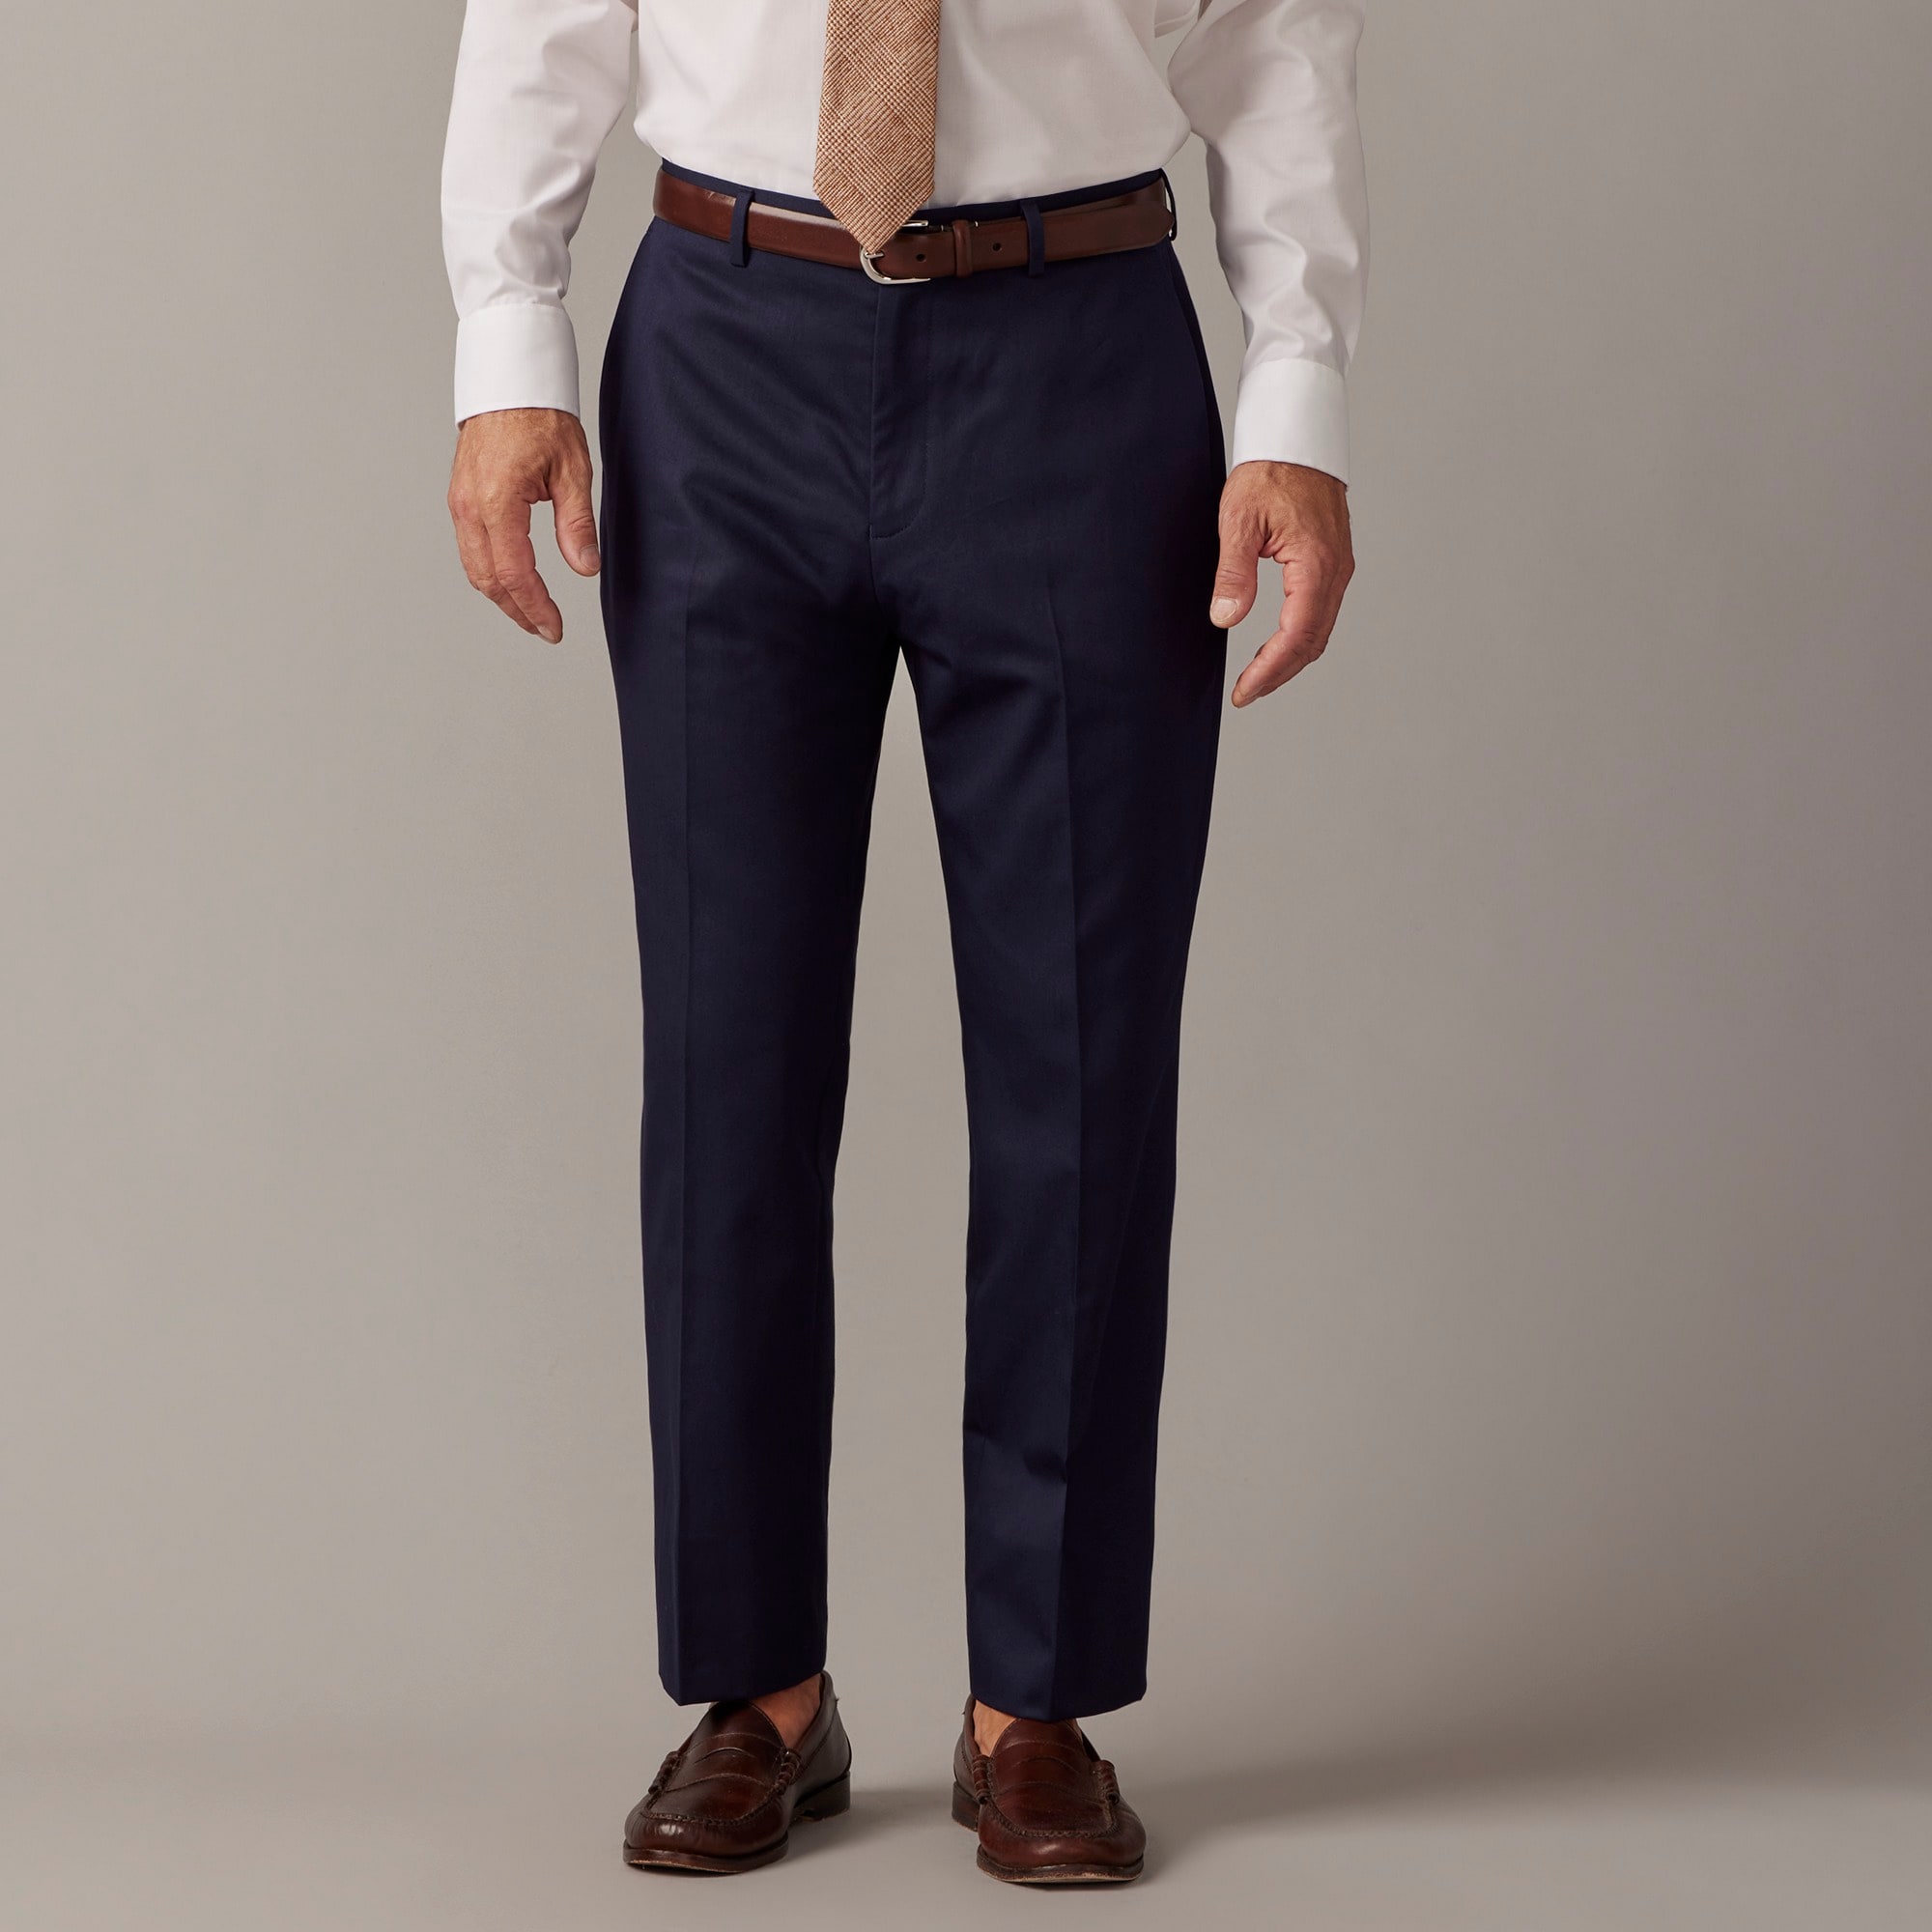  Crosby Classic-fit suit pant in Italian chino